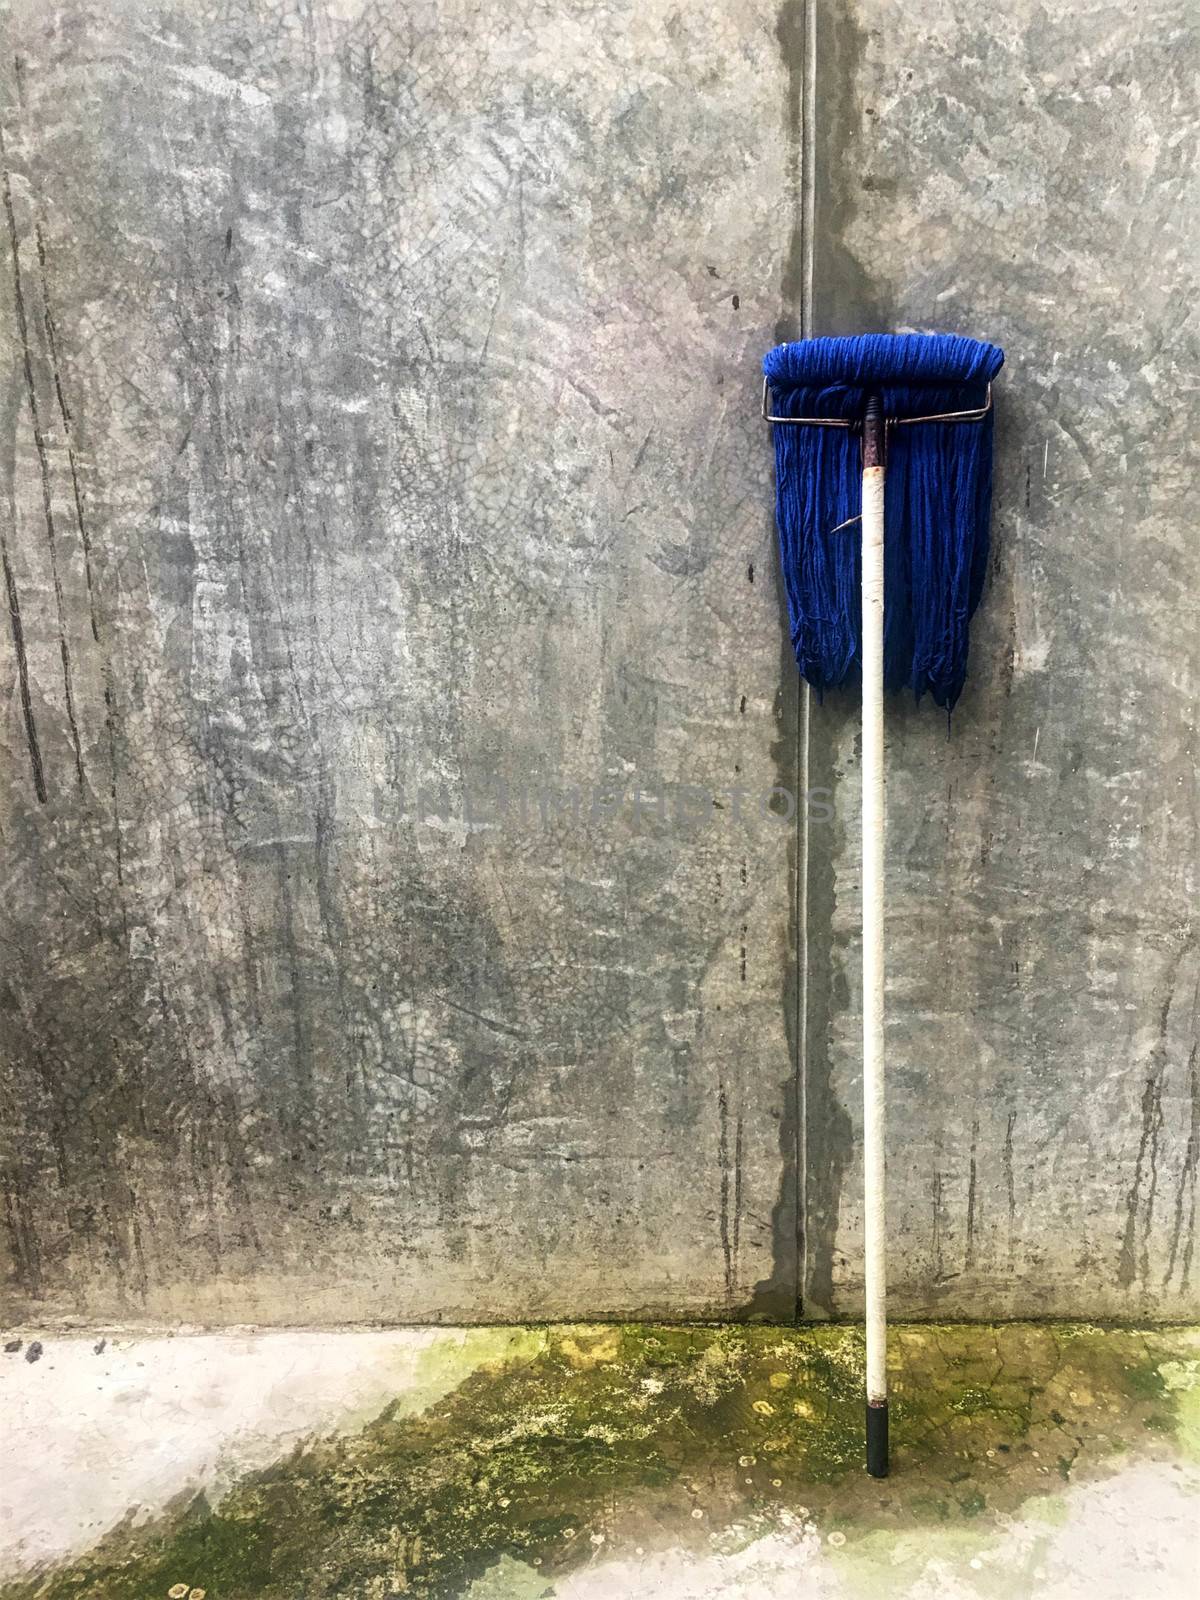 Dirty blue mop for washing clean up house by e22xua